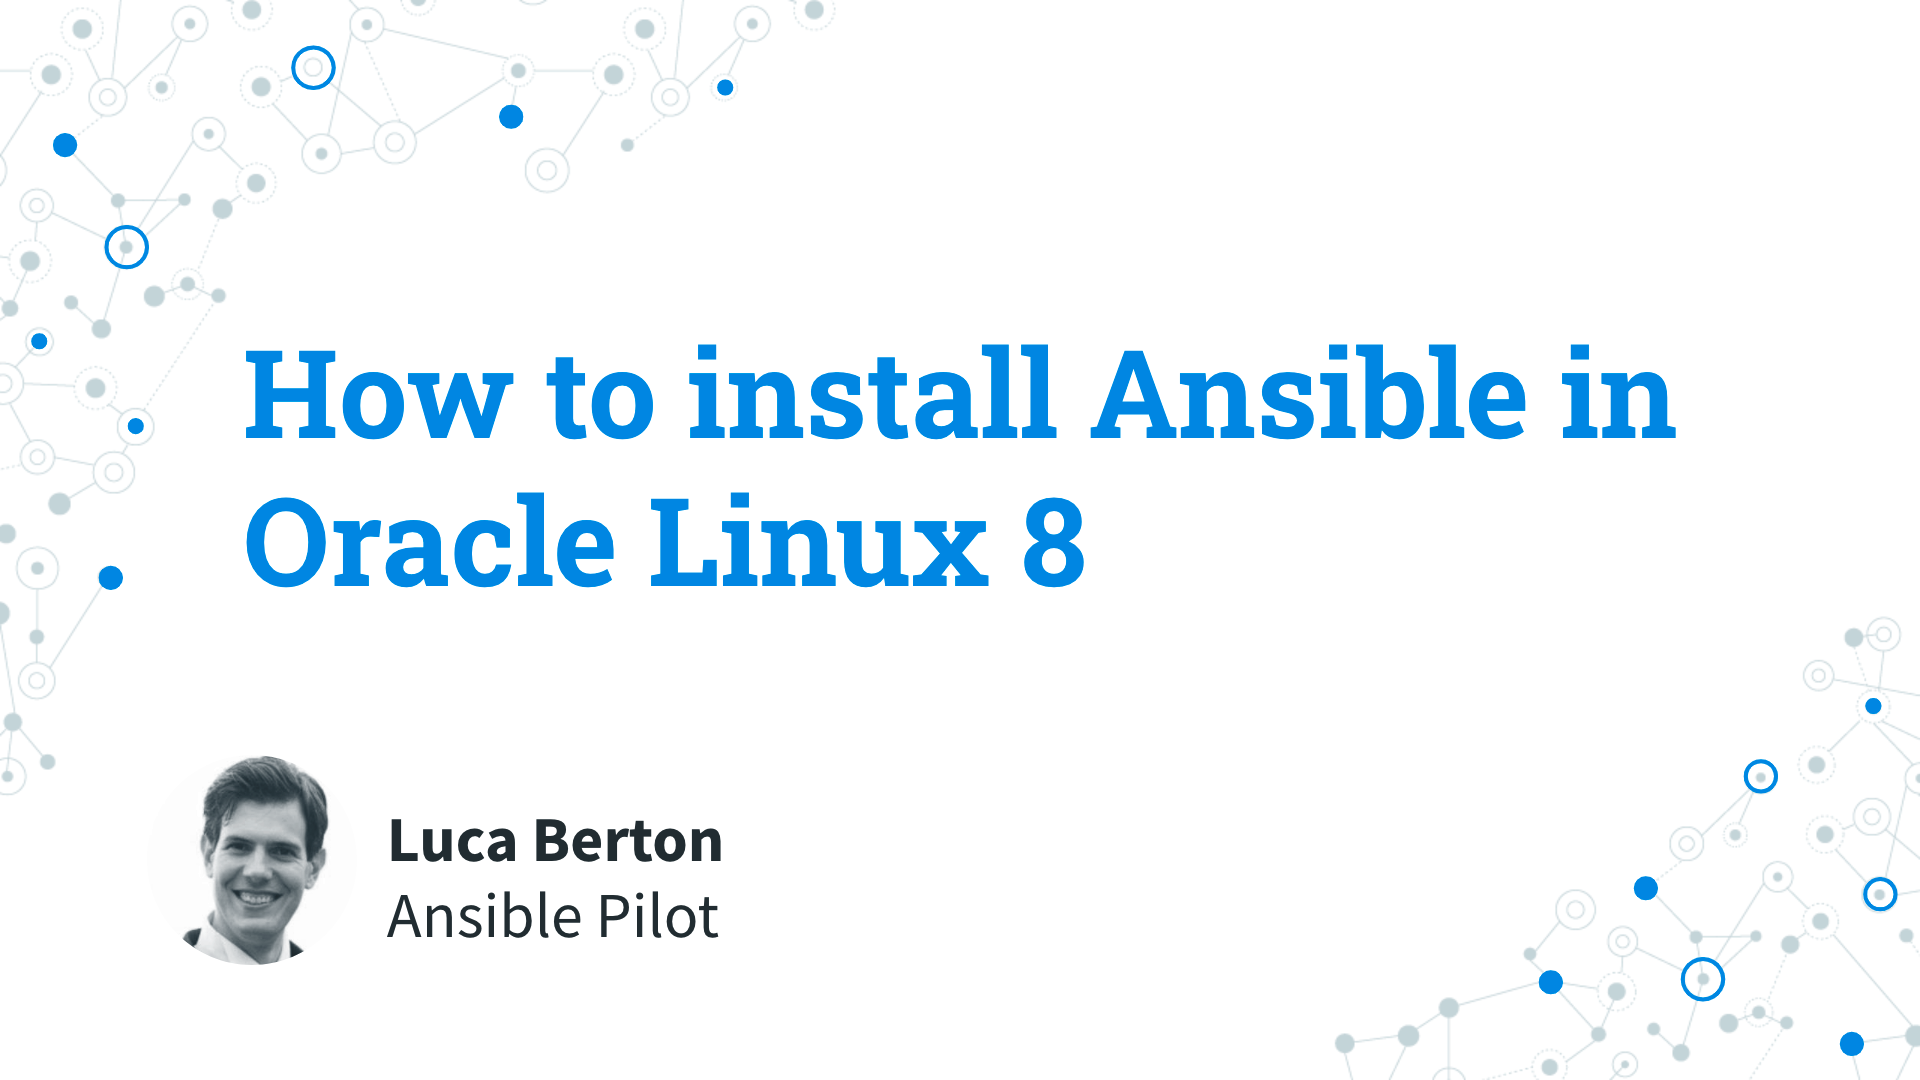 How to install Ansible in Oracle Linux 8 - Ansible install